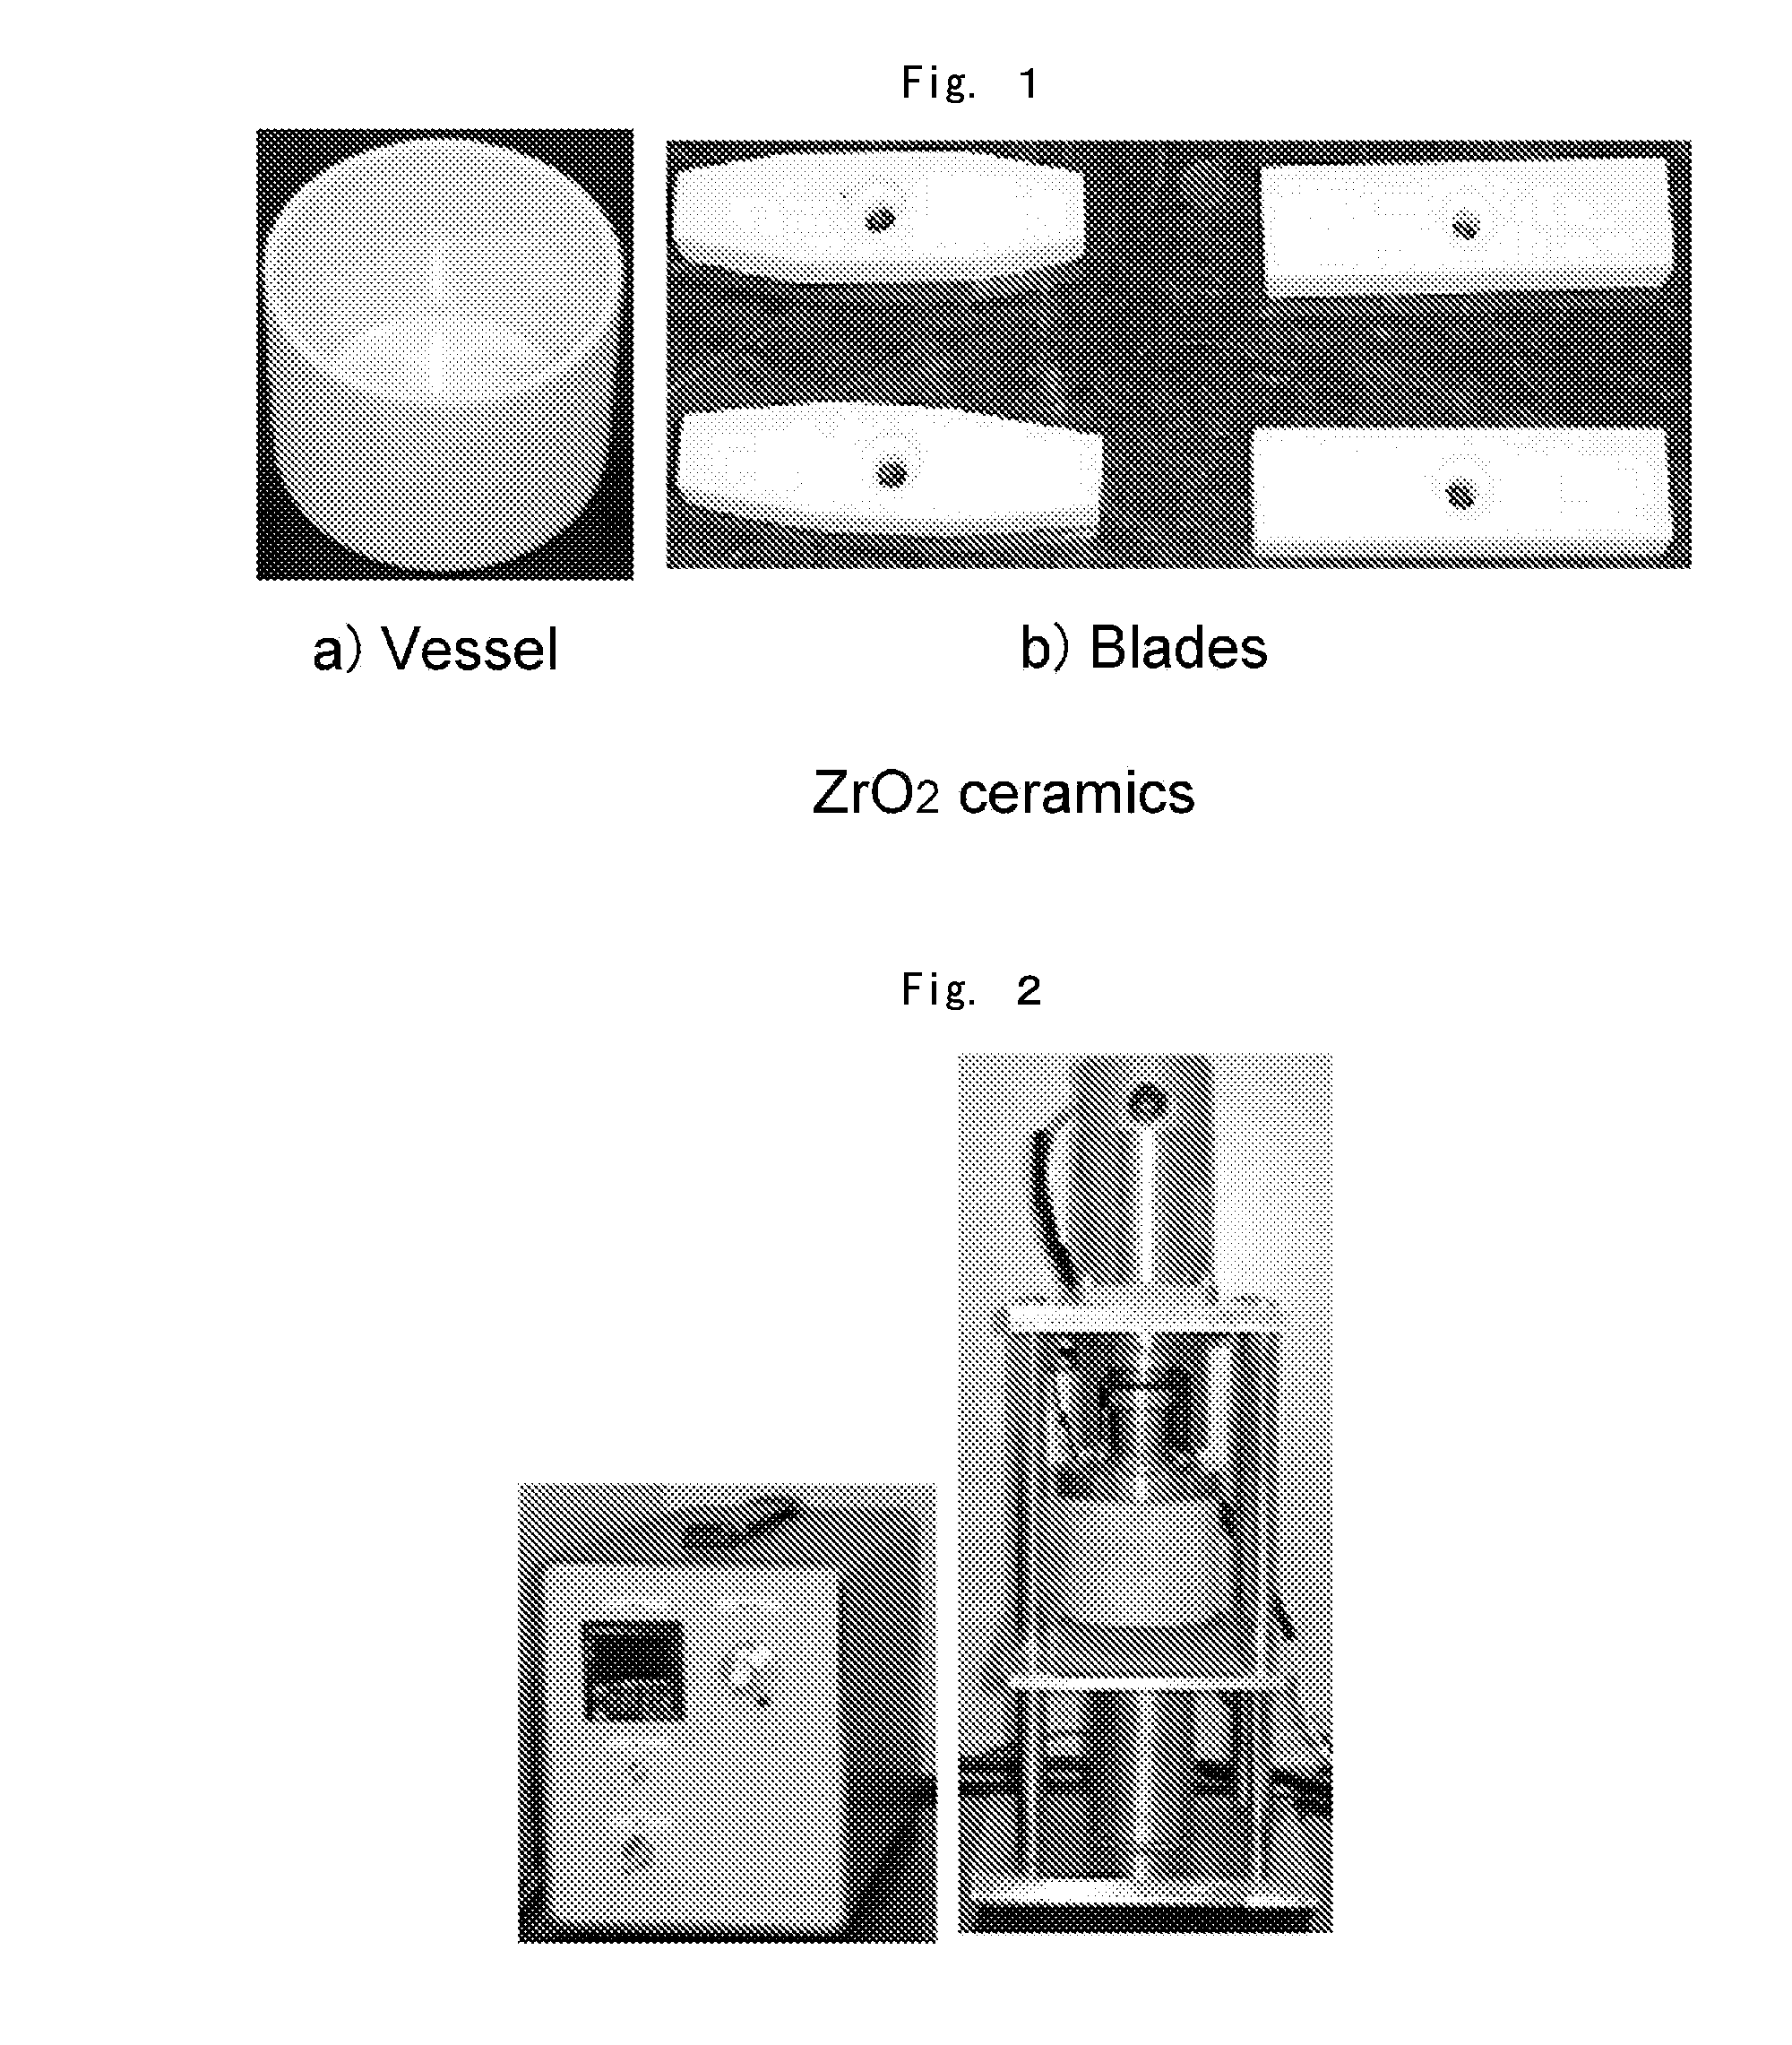 Method and pulverizing apparatus for preparing pulverized product of extracted tooth, demineralized powder originated from extracted tooth, and composite of demineralized powder and apatite, suitable for use in highly advanced medical treatments